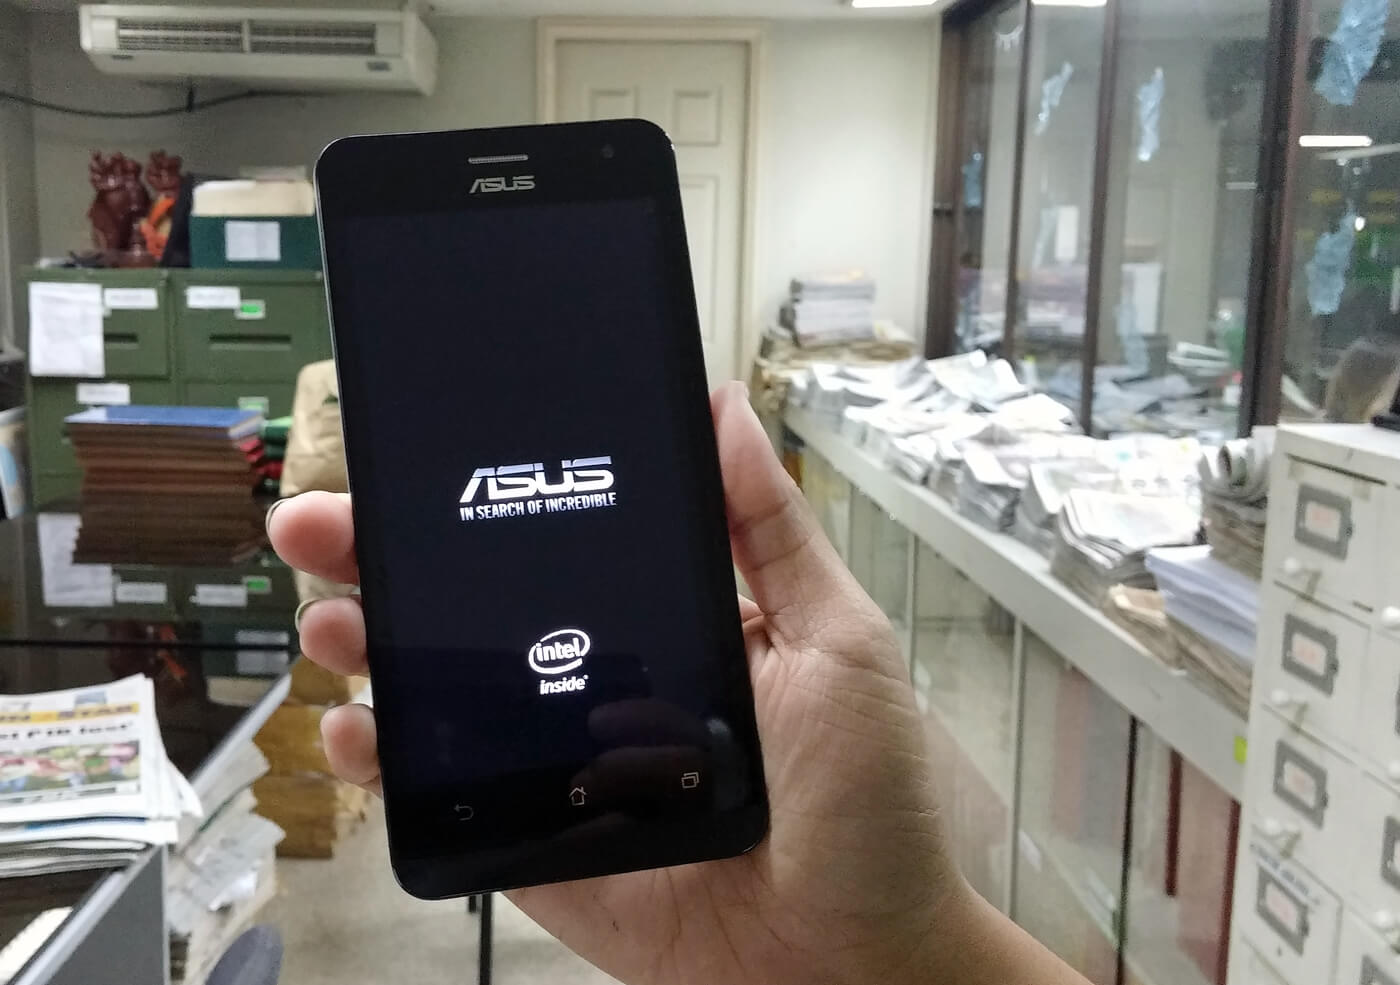 Budget smartphone. The Asus Zenfone 5 Lite is a good option for those wanting to upgrade to a smartphone on a budget.